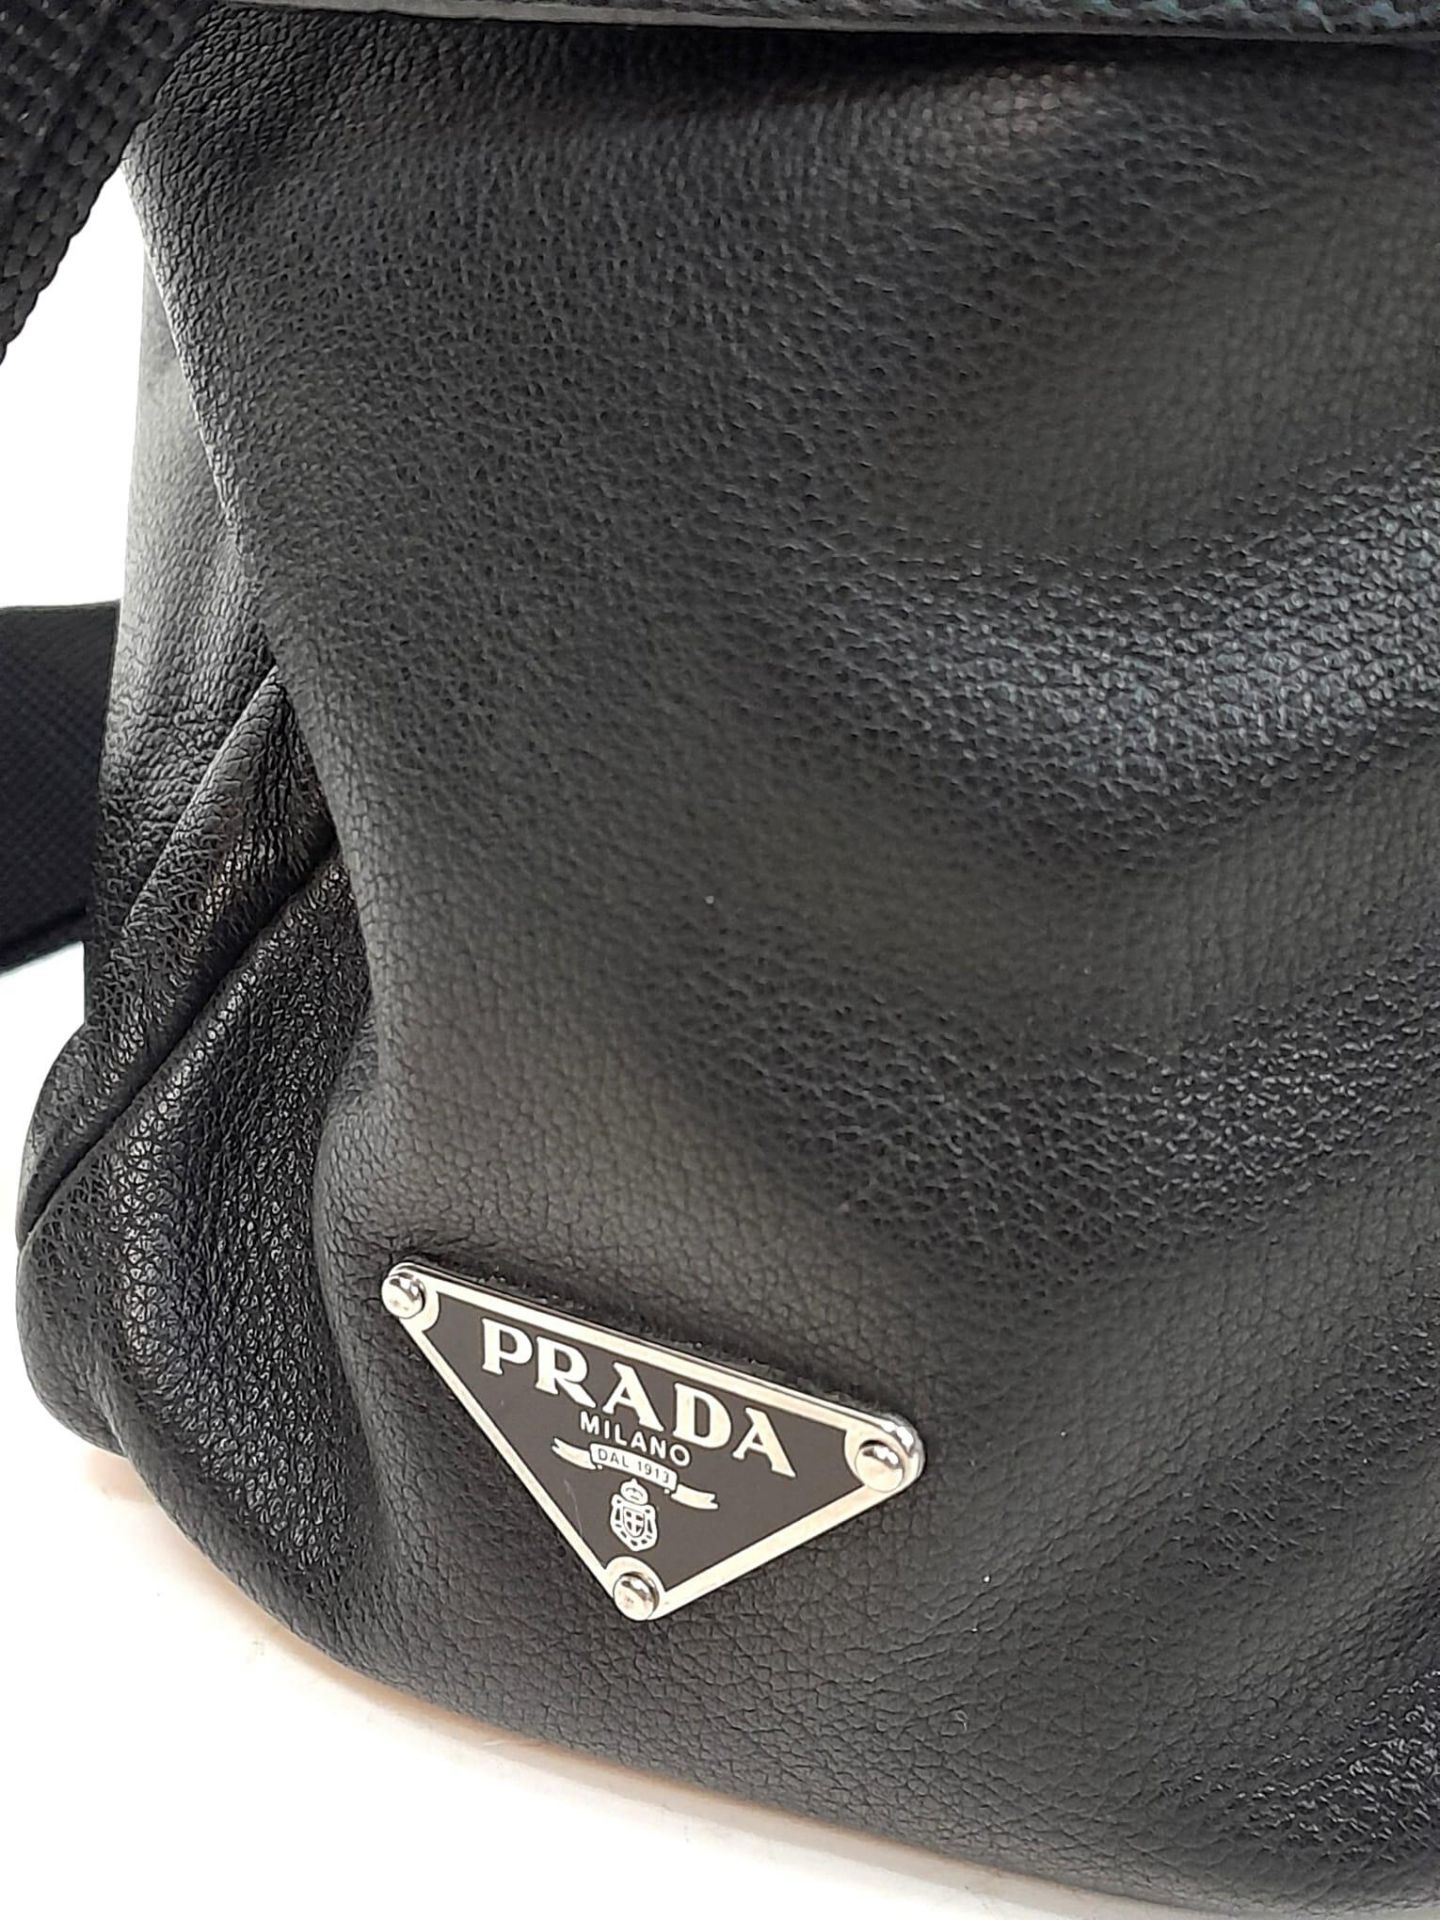 A Prada Black Duffle Bag. Leather exterior with silver-toned hardware, zipped outer compartment to - Bild 7 aus 12